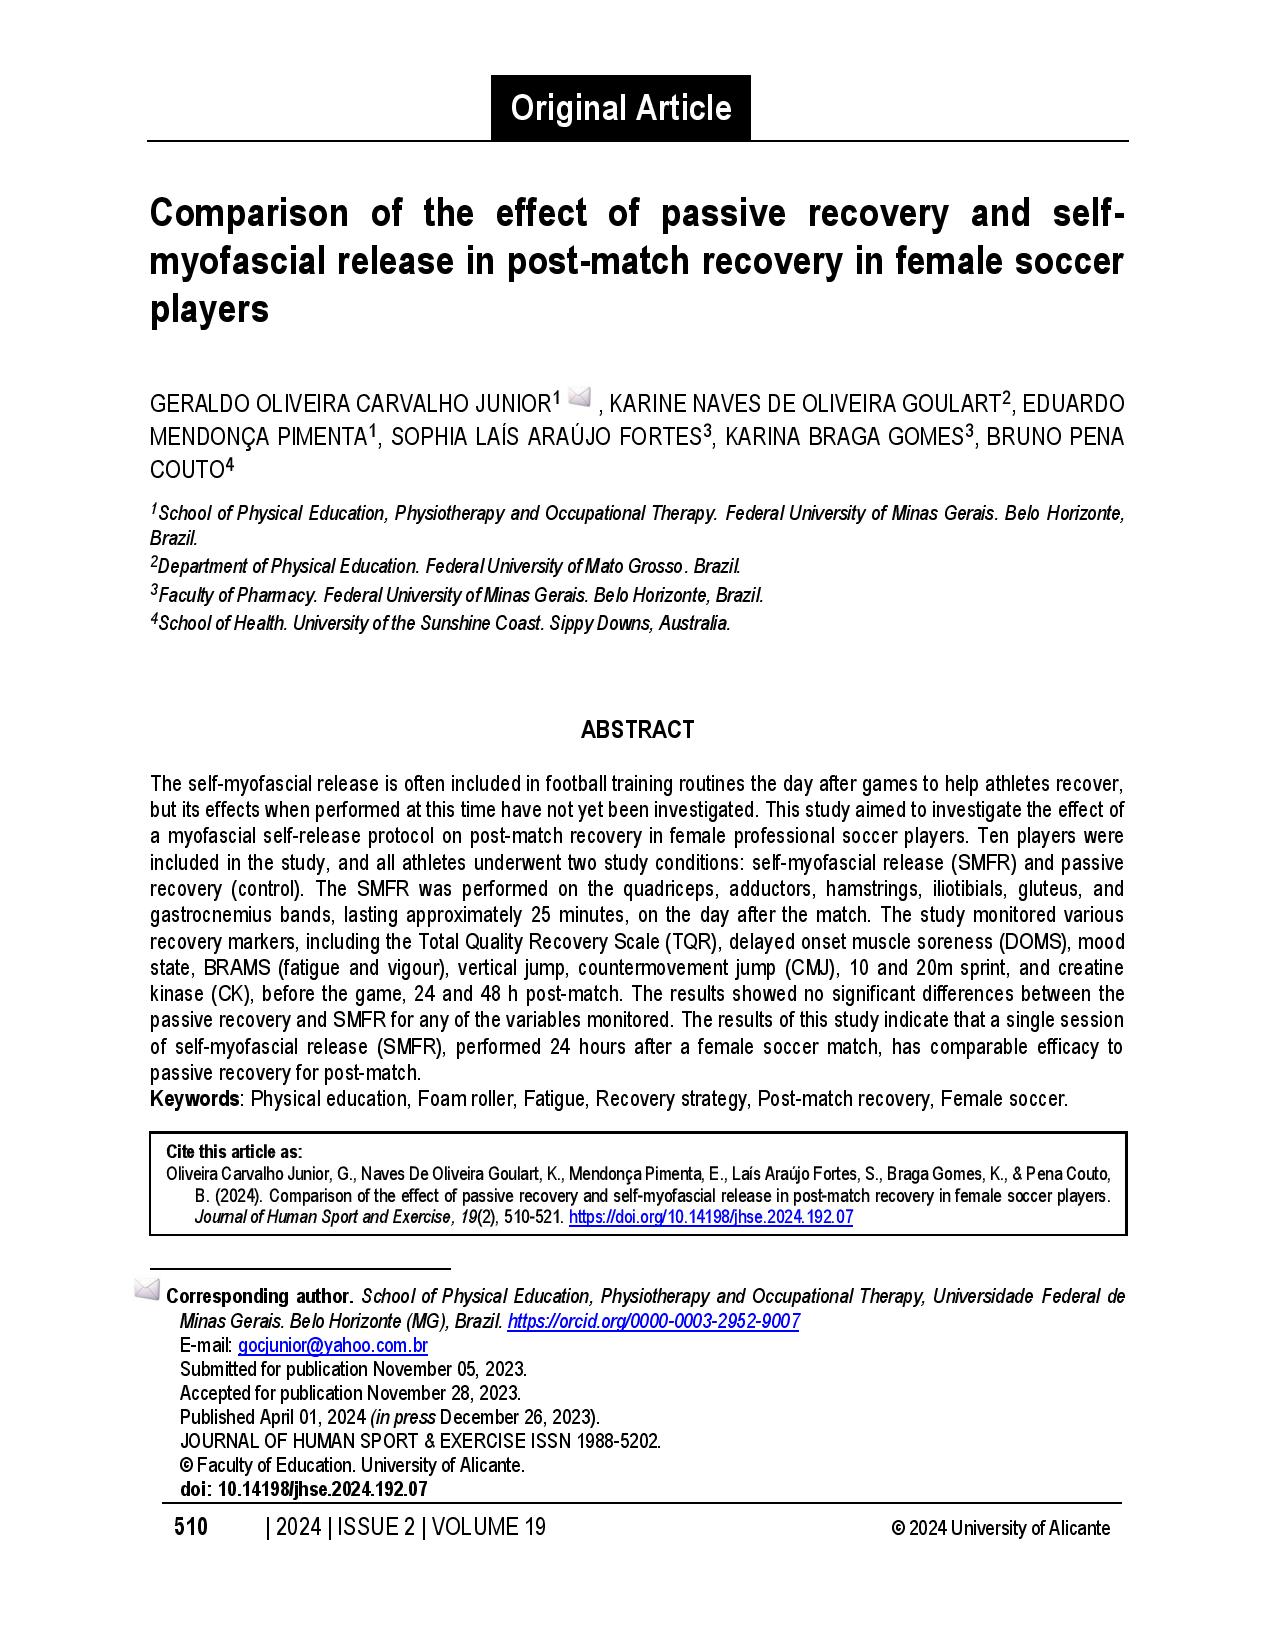 Comparison of the effect of passive recovery and self-myofascial release in post-match recovery in female soccer players